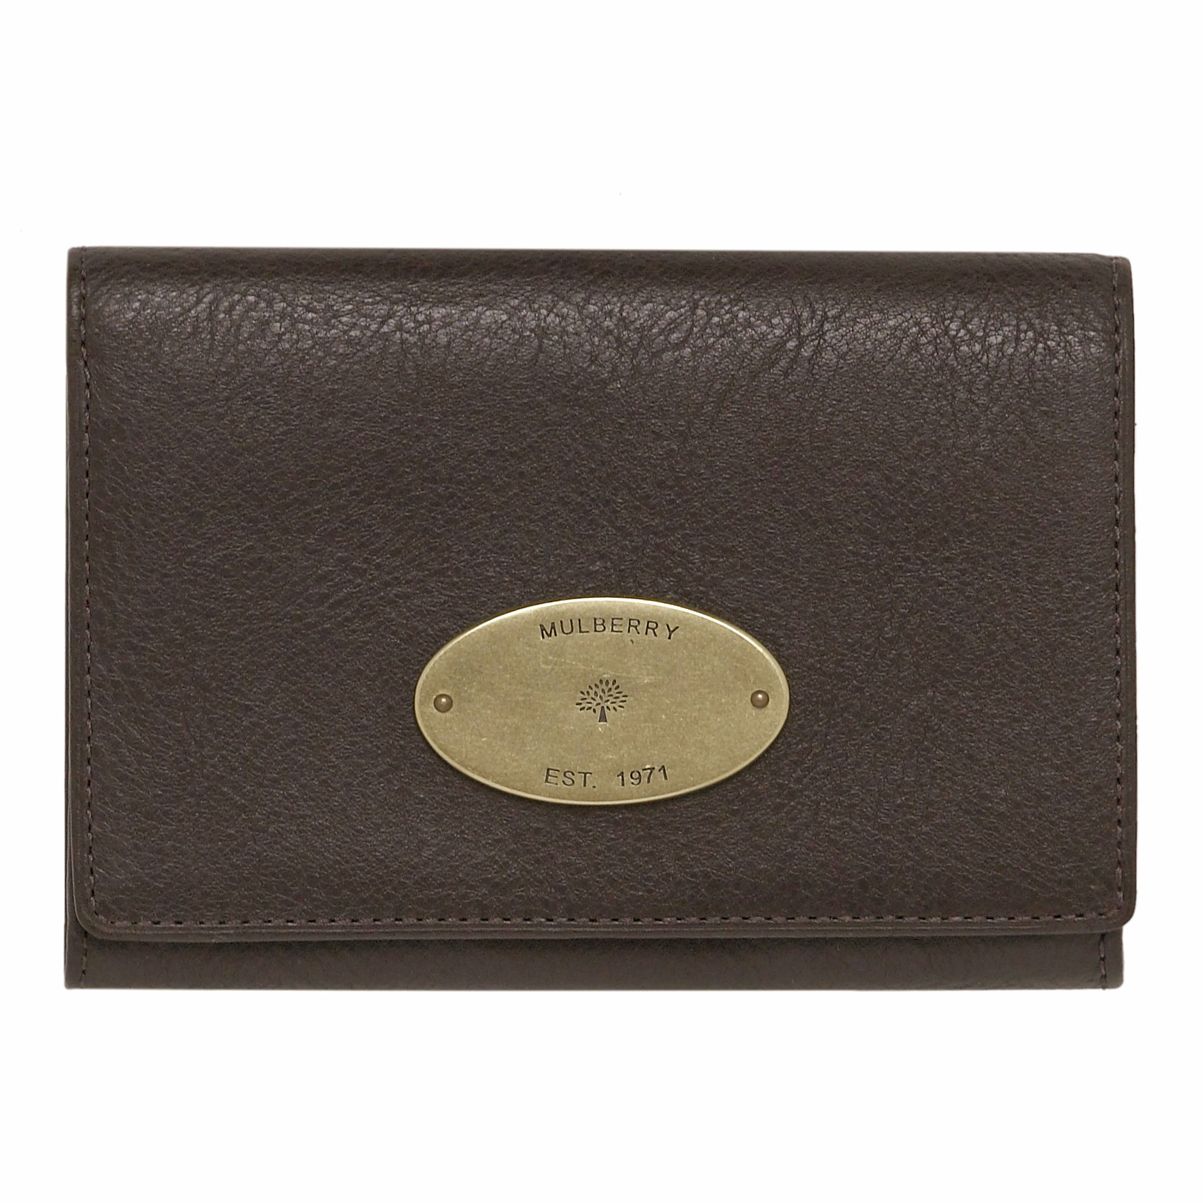 Mulberry Leather French Purse, Brown at John Lewis